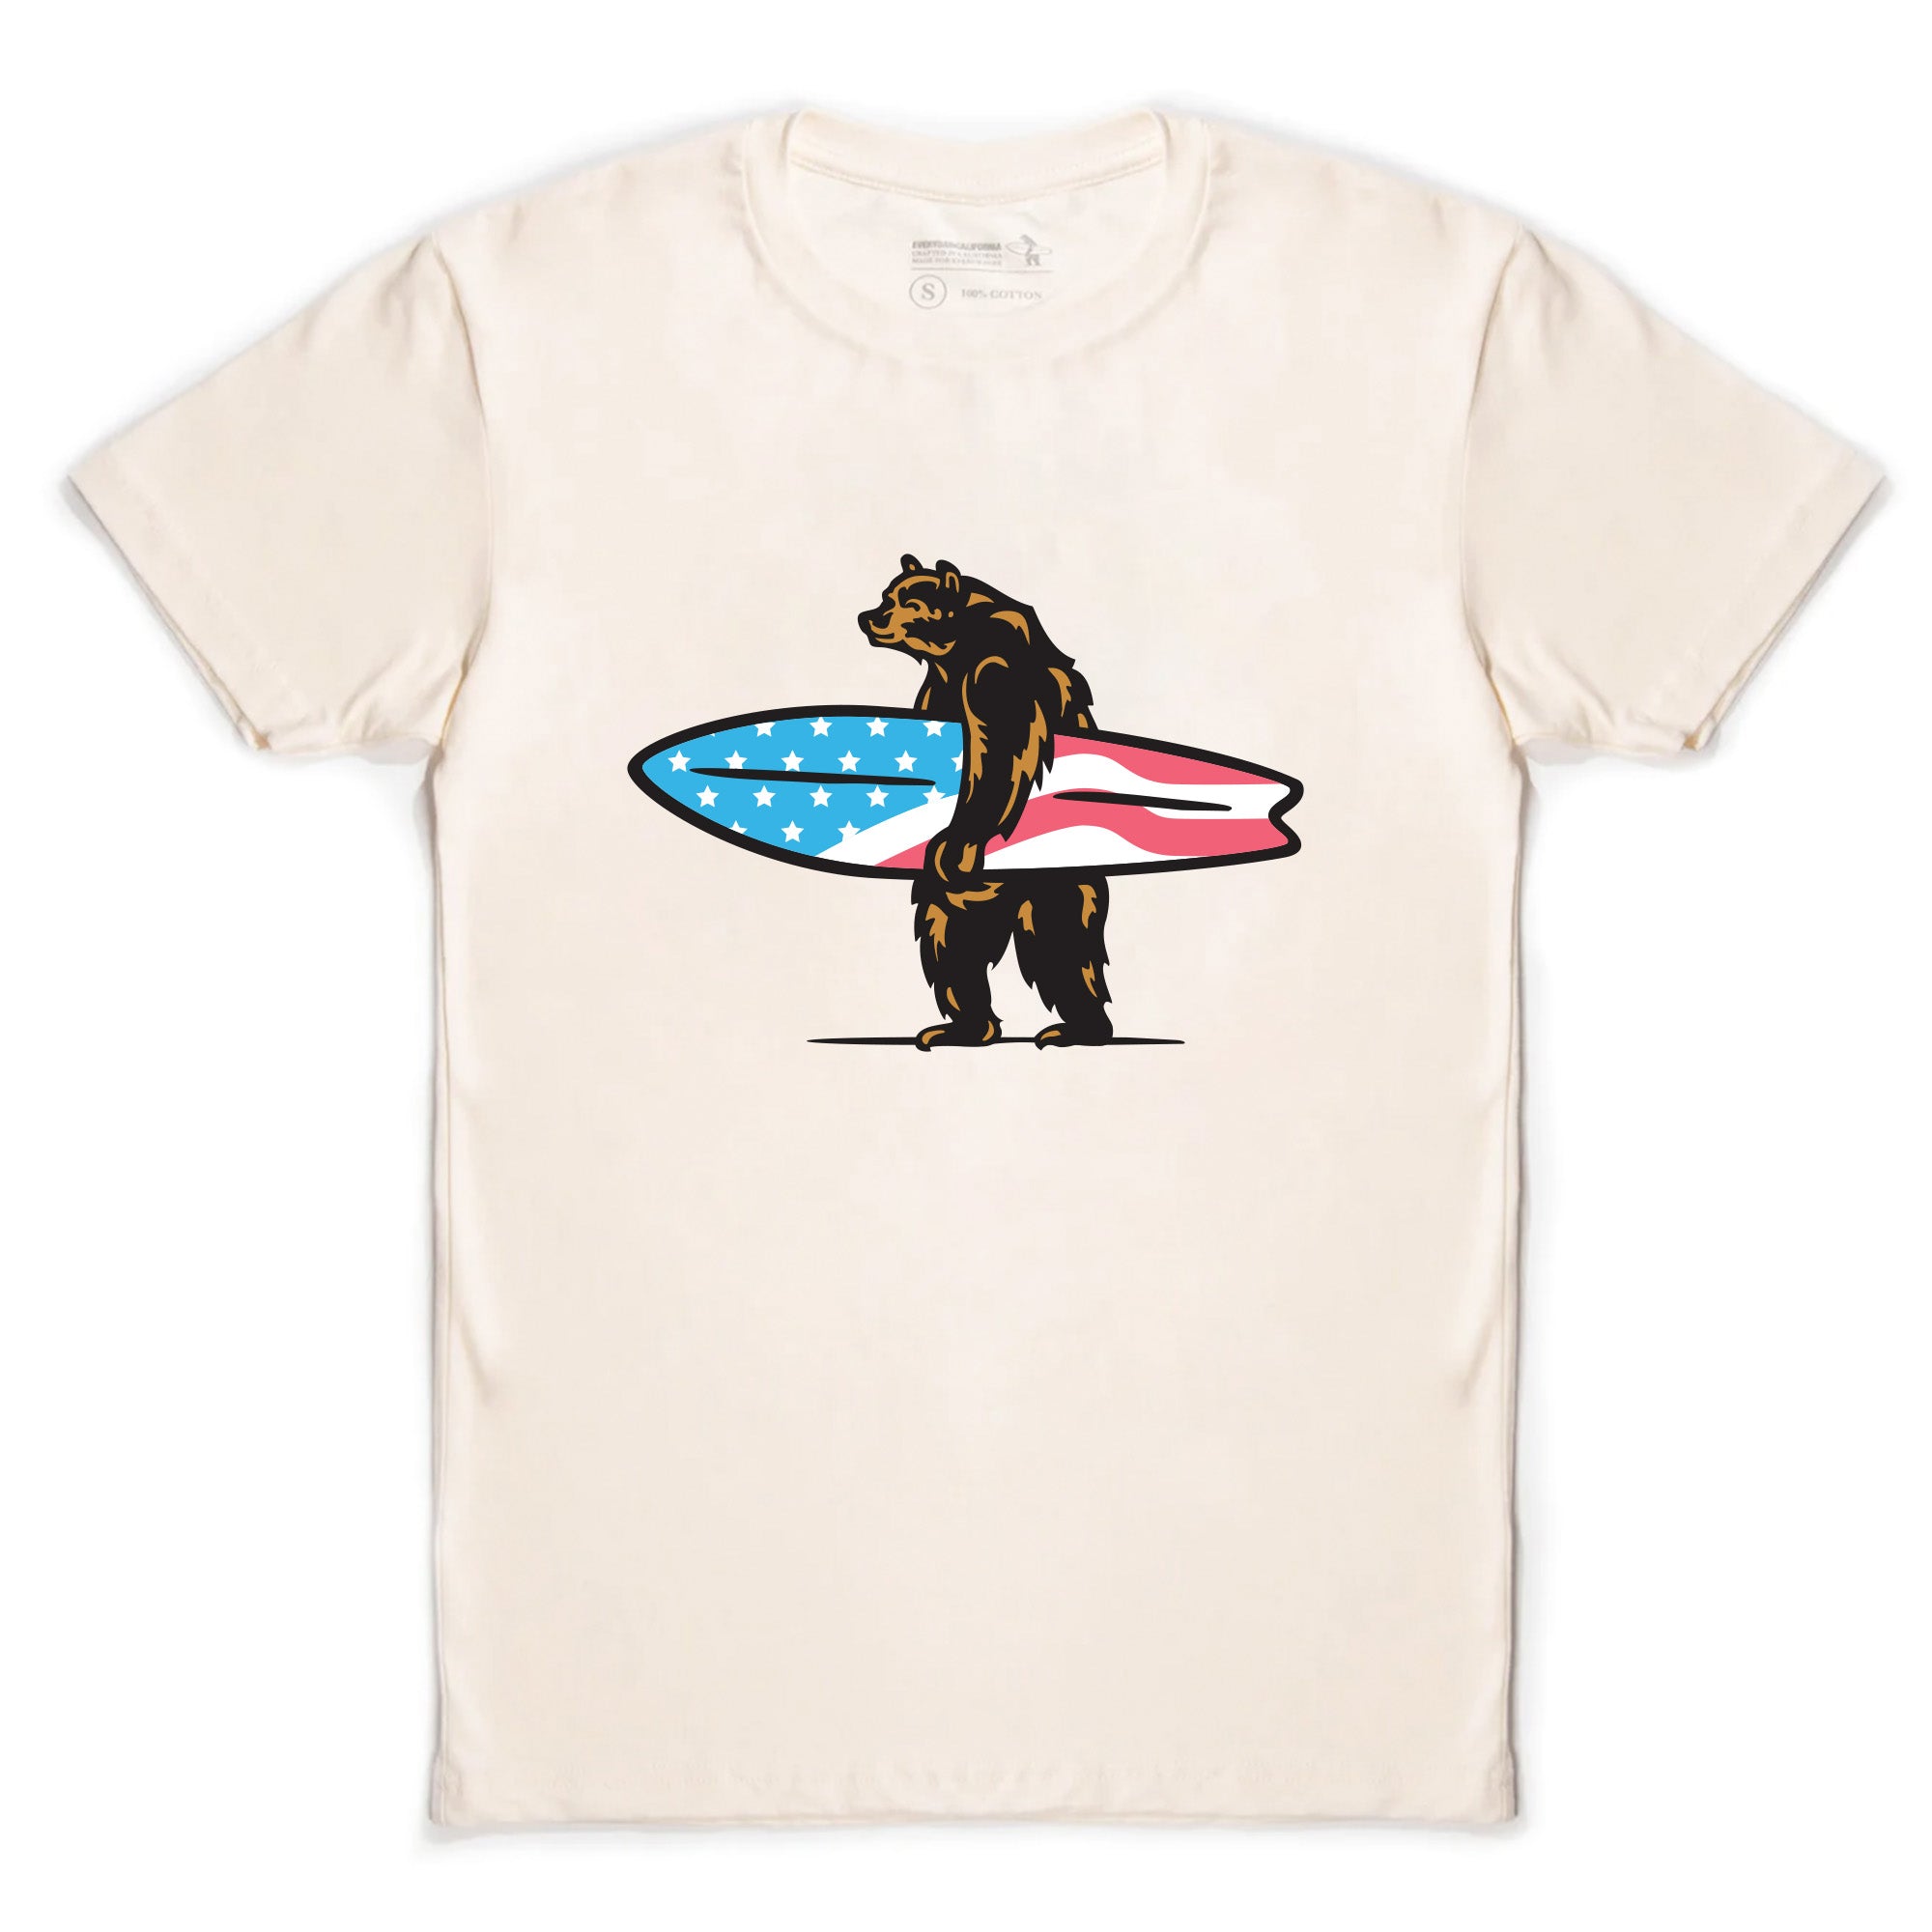 Everyday California Men's Patriotic tee featuring Brutus the bear in red, white, and blue.